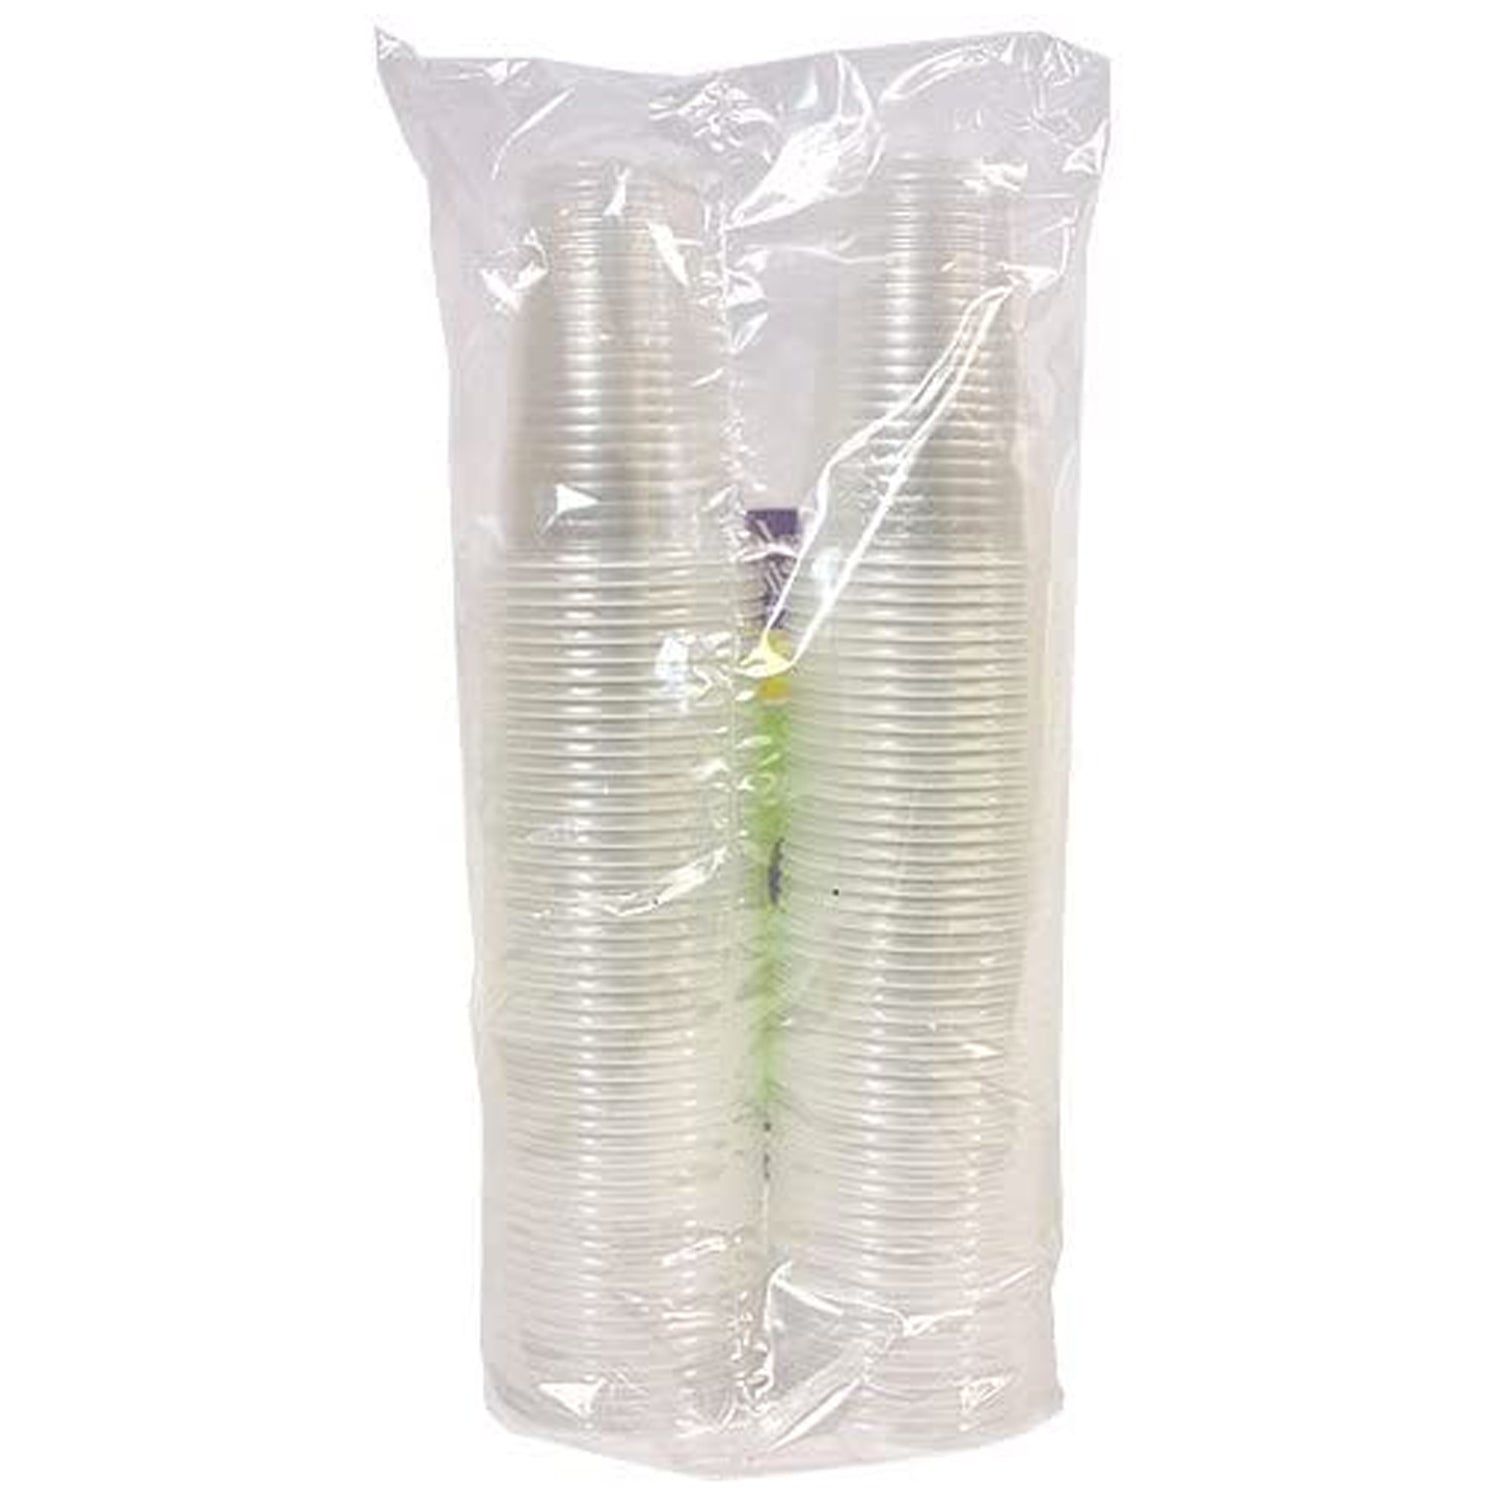 Plastic Cups Bulk Disposable Clear Cups 7 oz - 1200 Count Case BPA-Free -  Good For Cold Drinks, Part…See more Plastic Cups Bulk Disposable Clear Cups